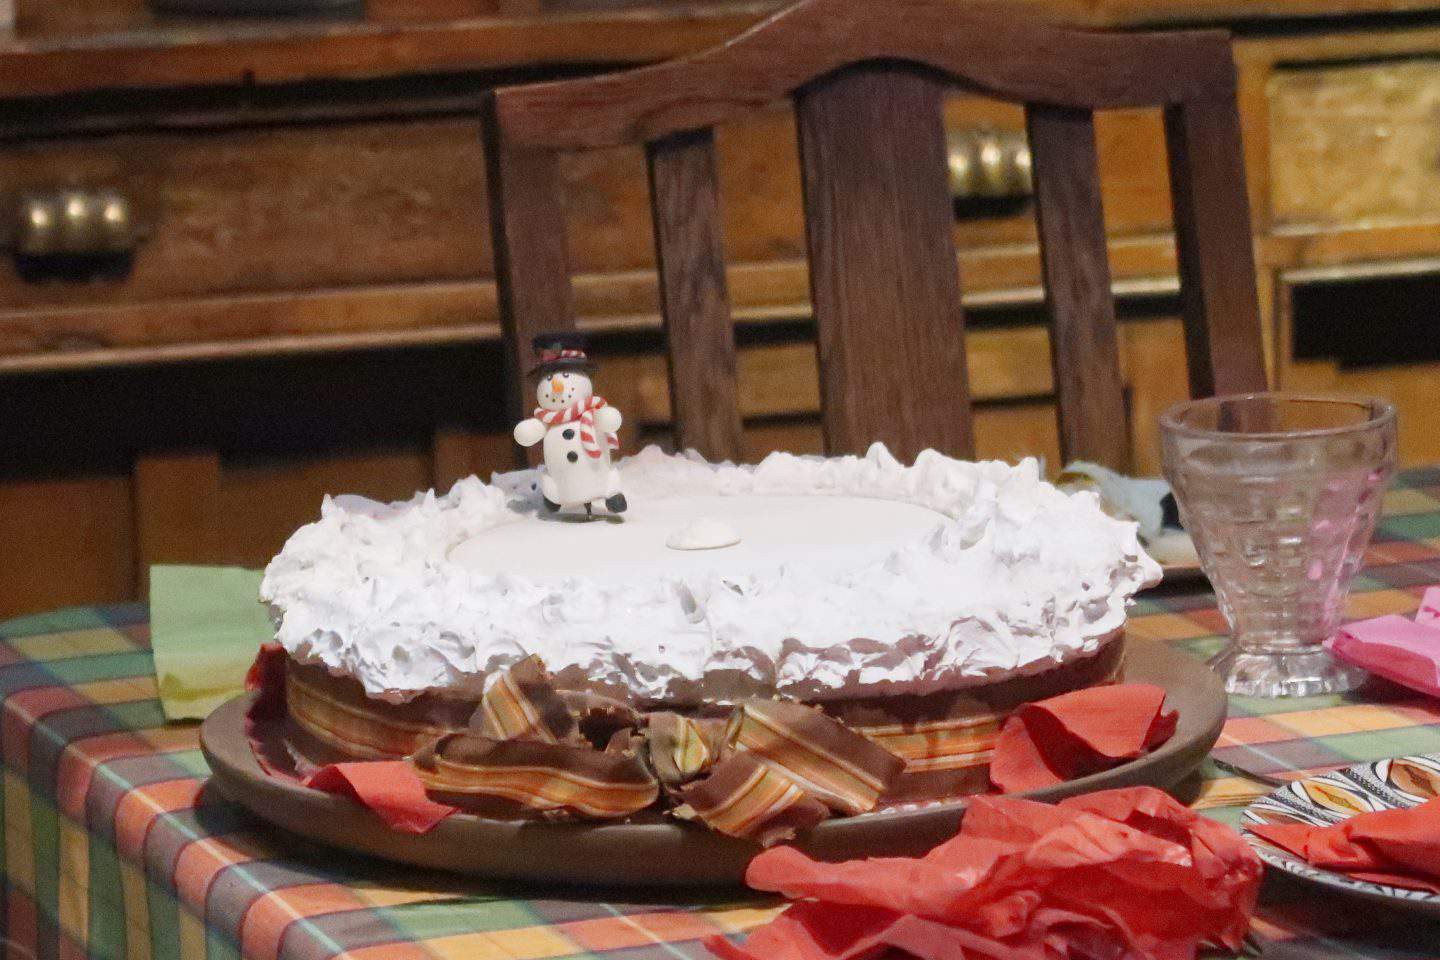 A cake sitting on top of a wooden table